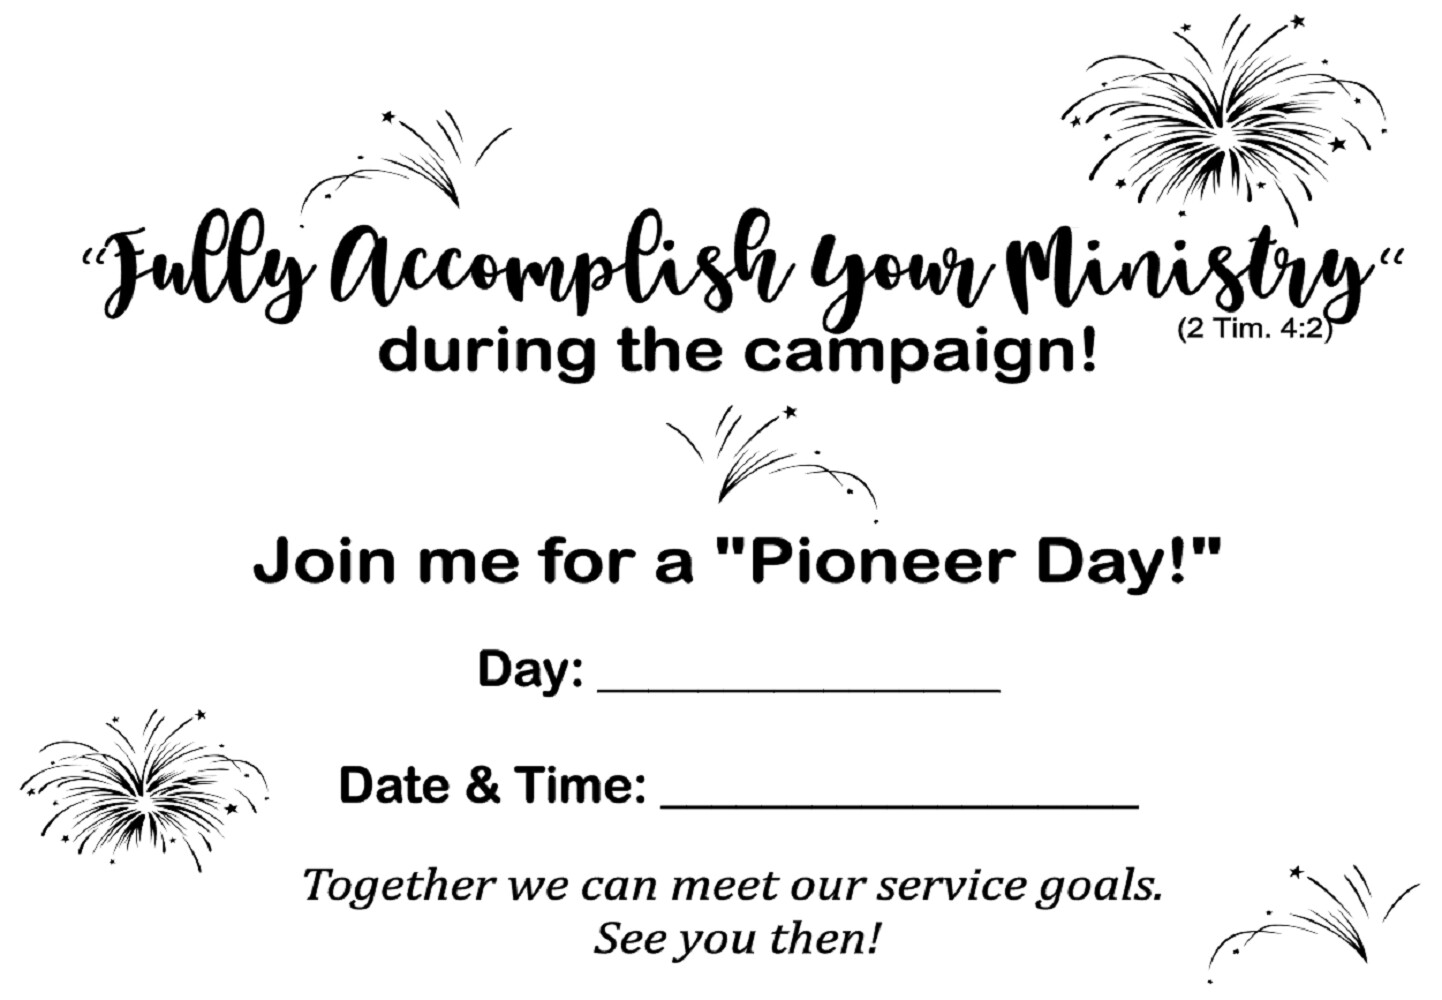 Invitations to a Pioneer Day "Fully Accomplish Your Ministry"
with envelopes